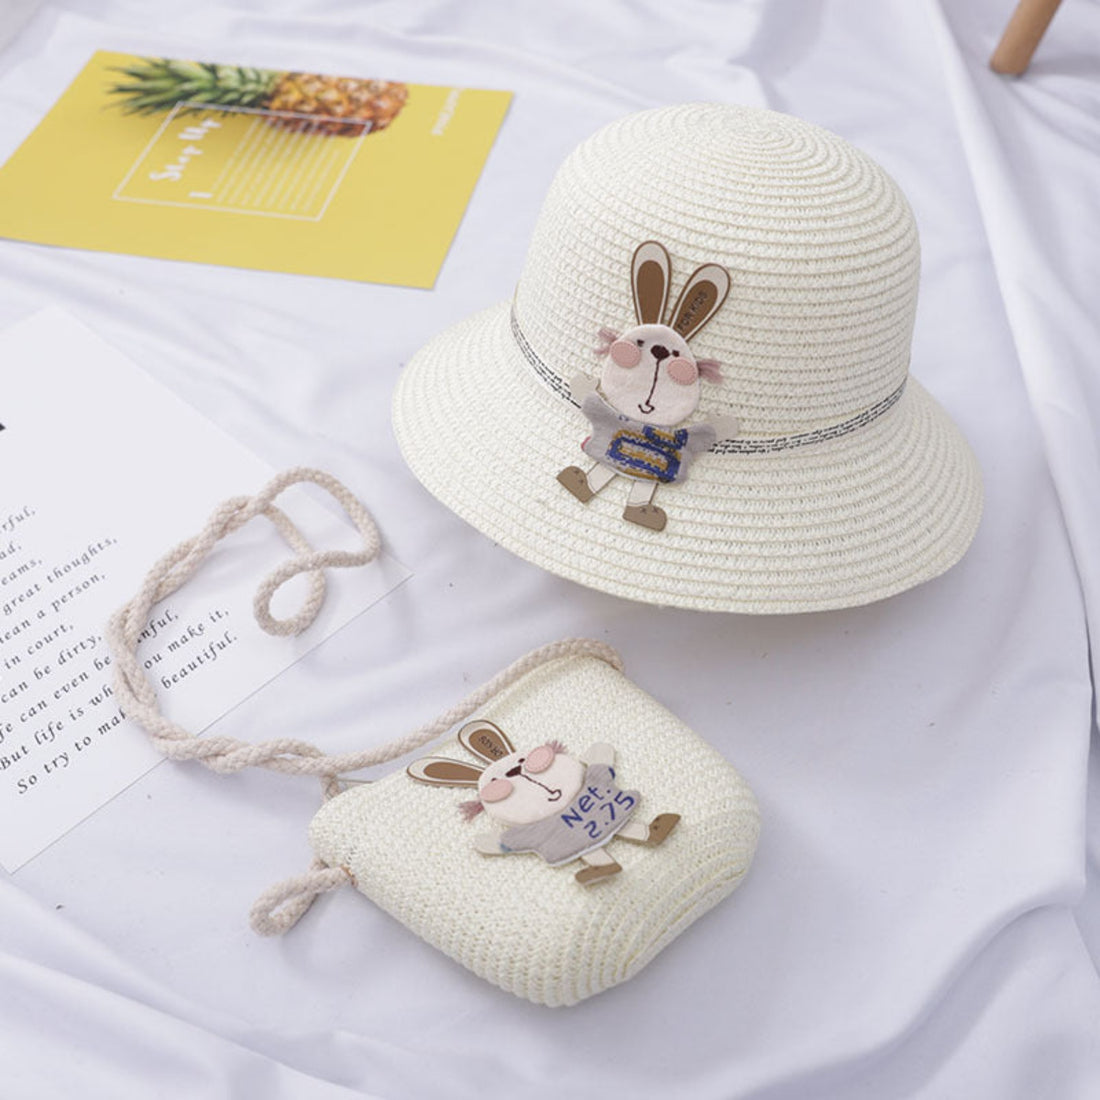 Kids wearing a summer straw hat with rabbit decoration